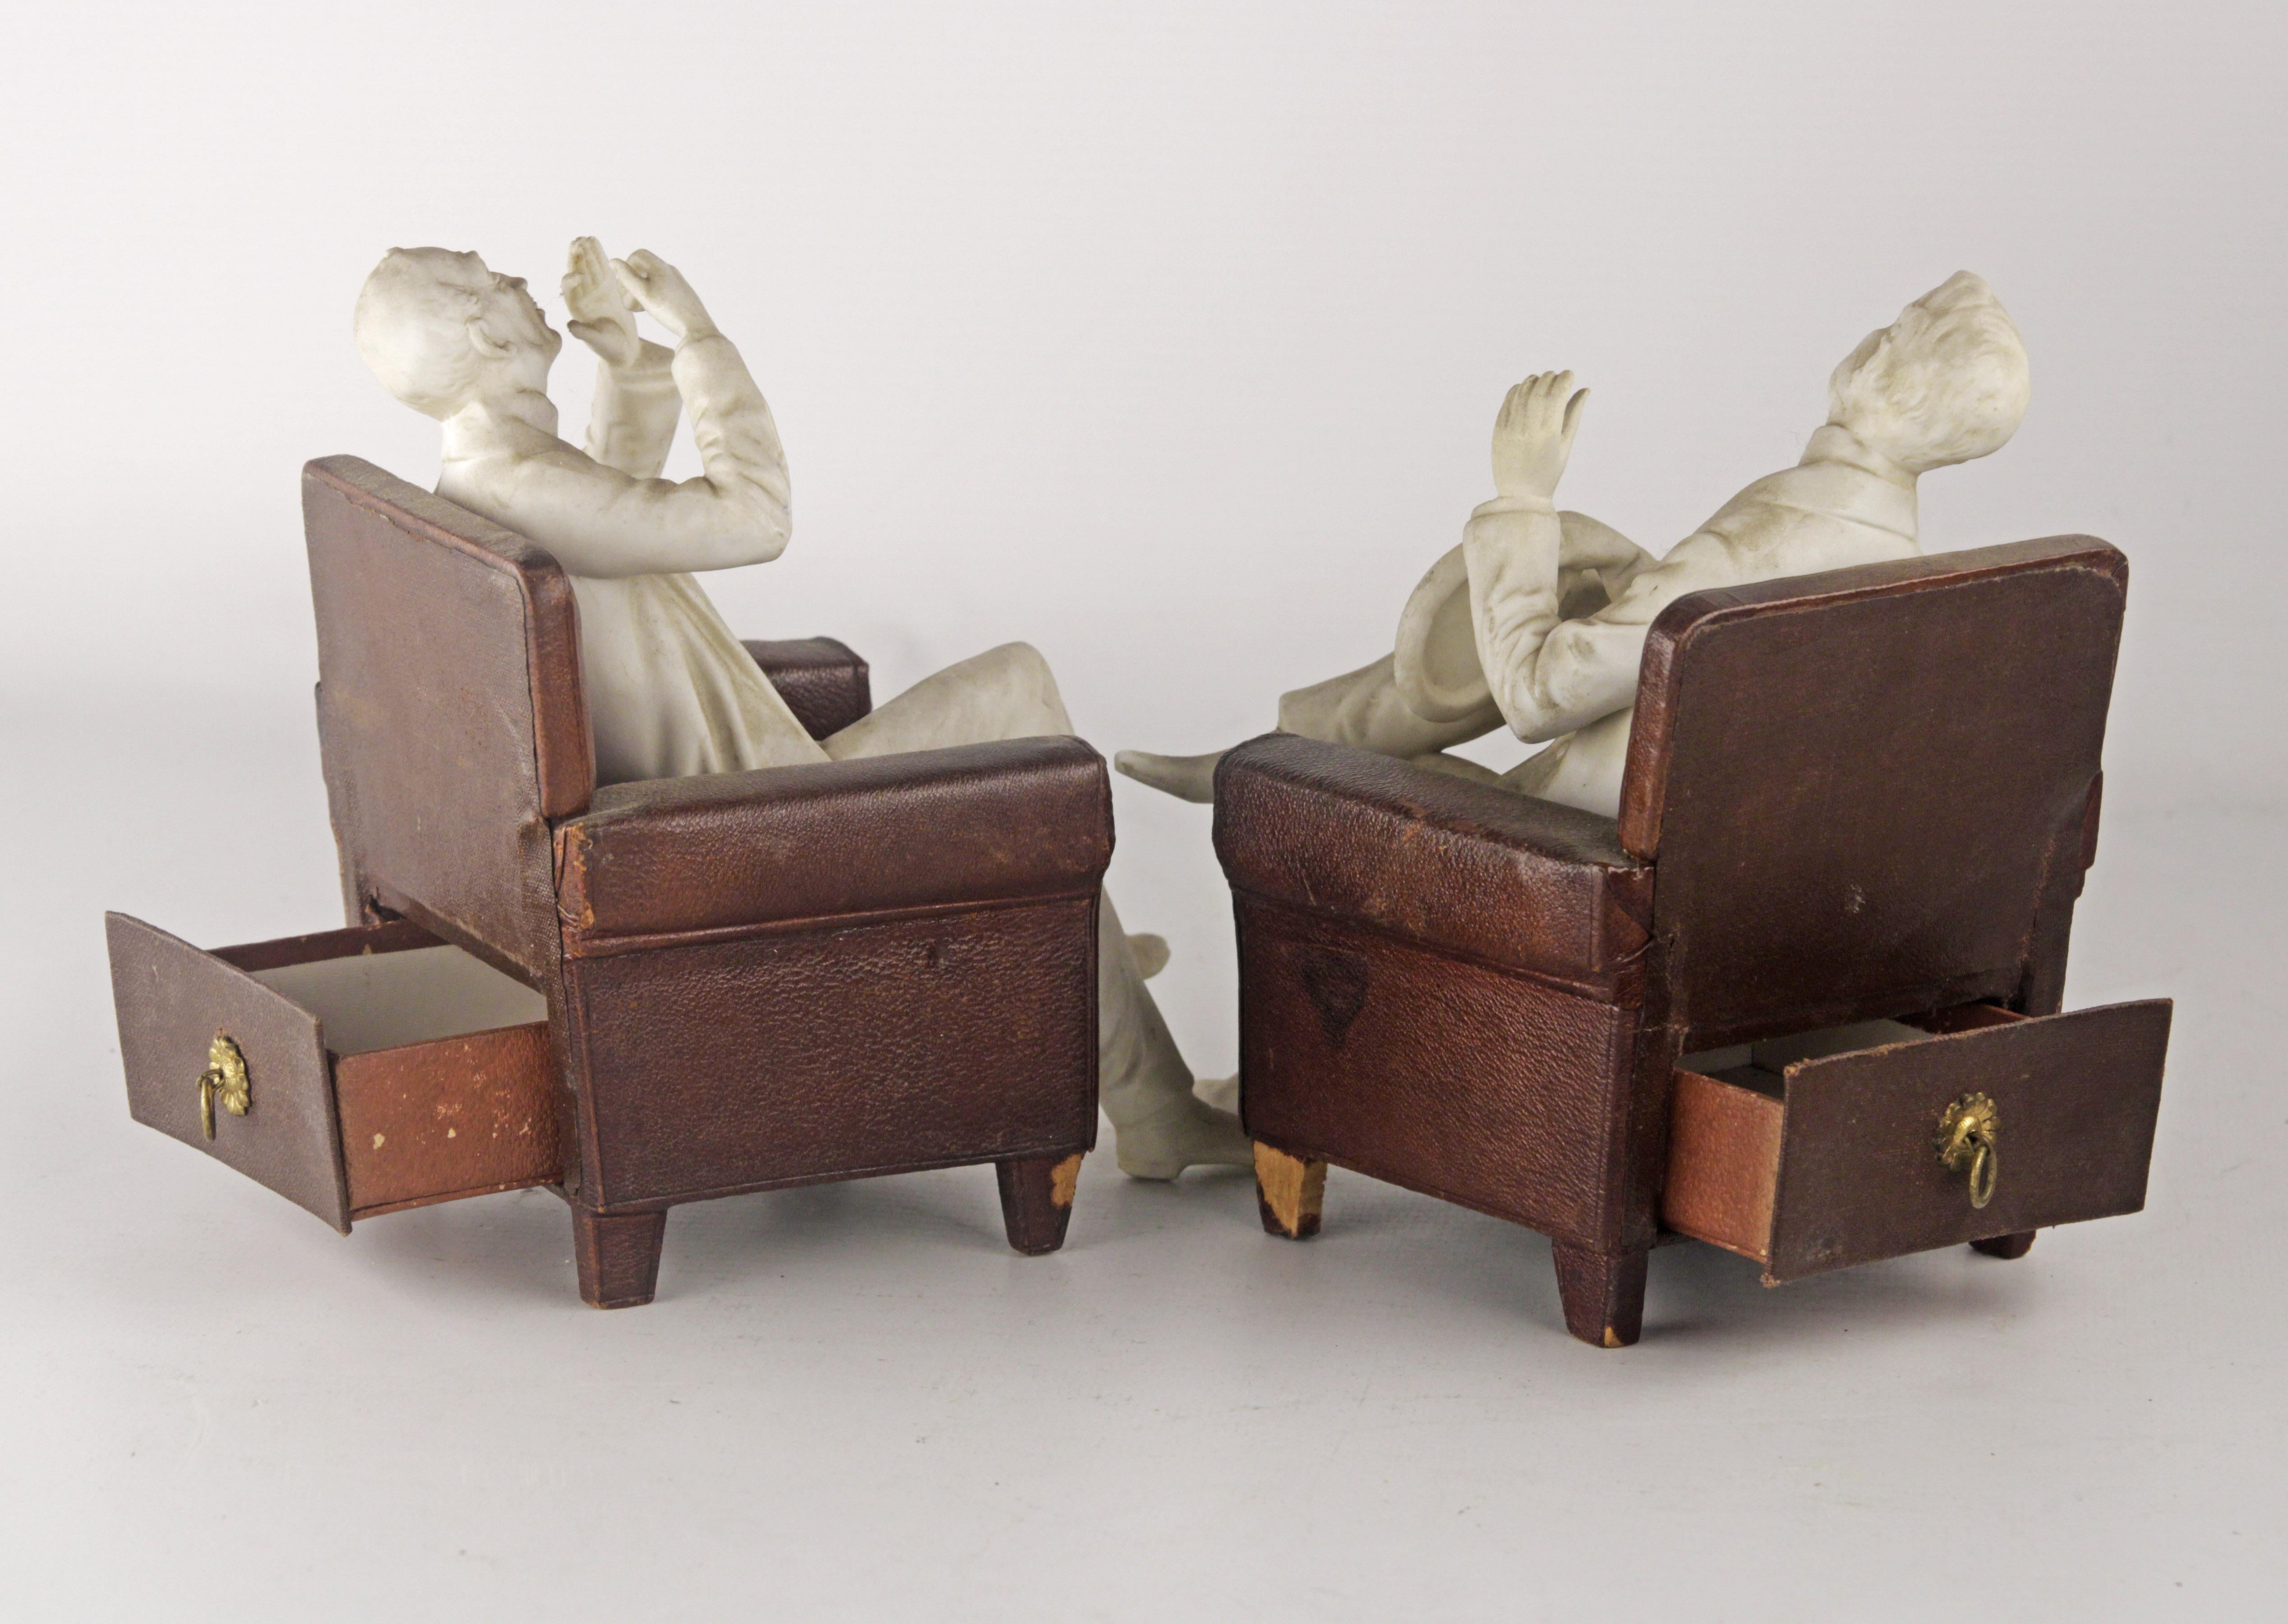 Art Deco Pair of 20th Century Decorative Biscuit Porcelain Sculptures with Jewelry Boxes For Sale